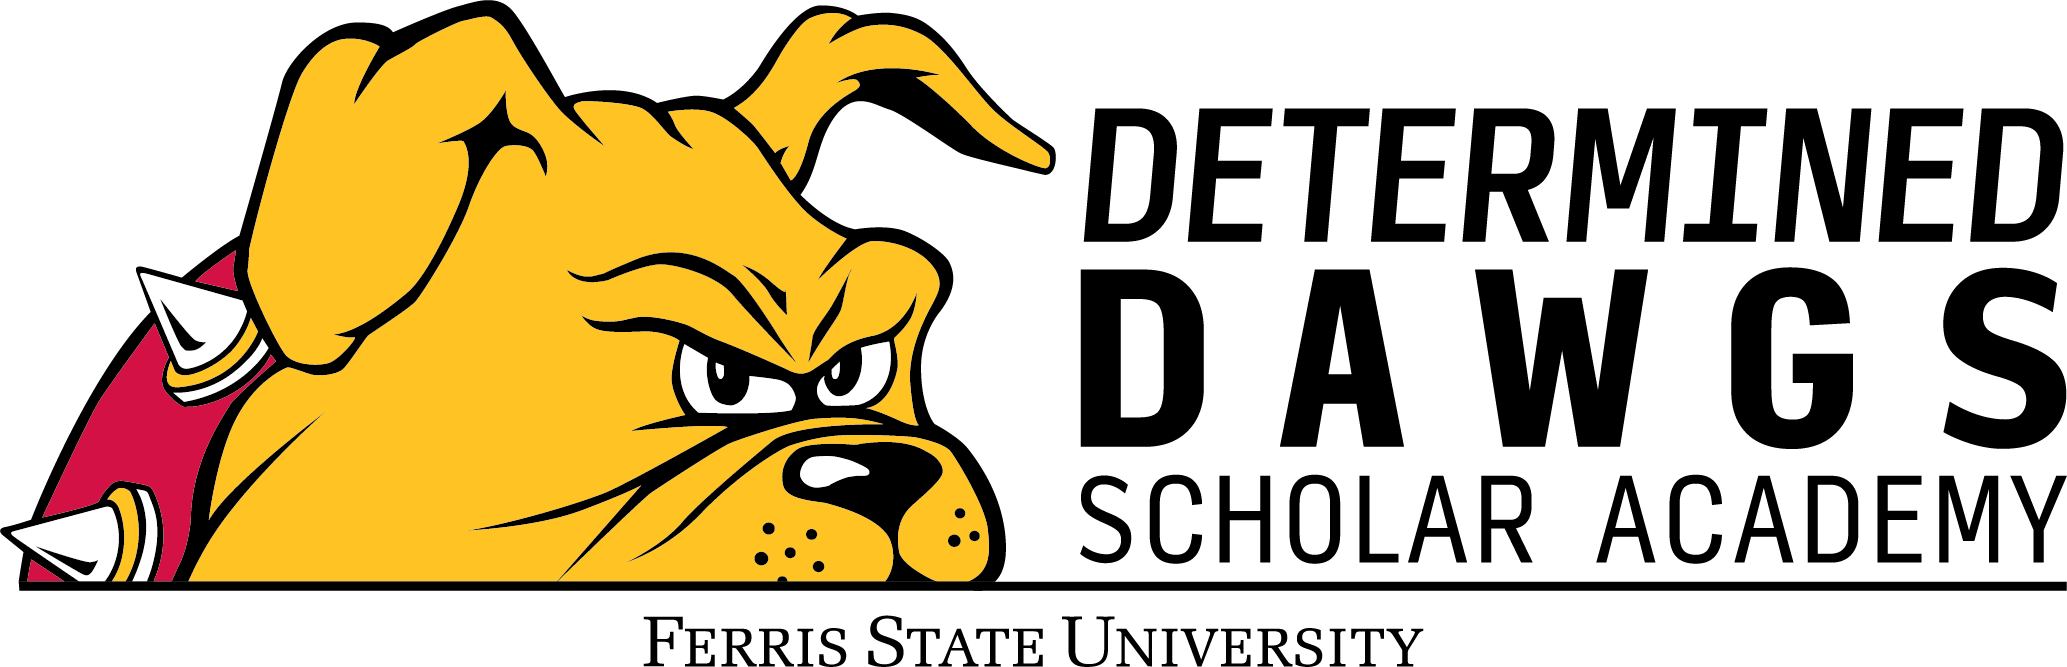 Determind Daws Scholars Academic logo - Bullldog mascot with the words Determined Dawgs Scholar Academy to the right of the dog and Ferris State University centered below